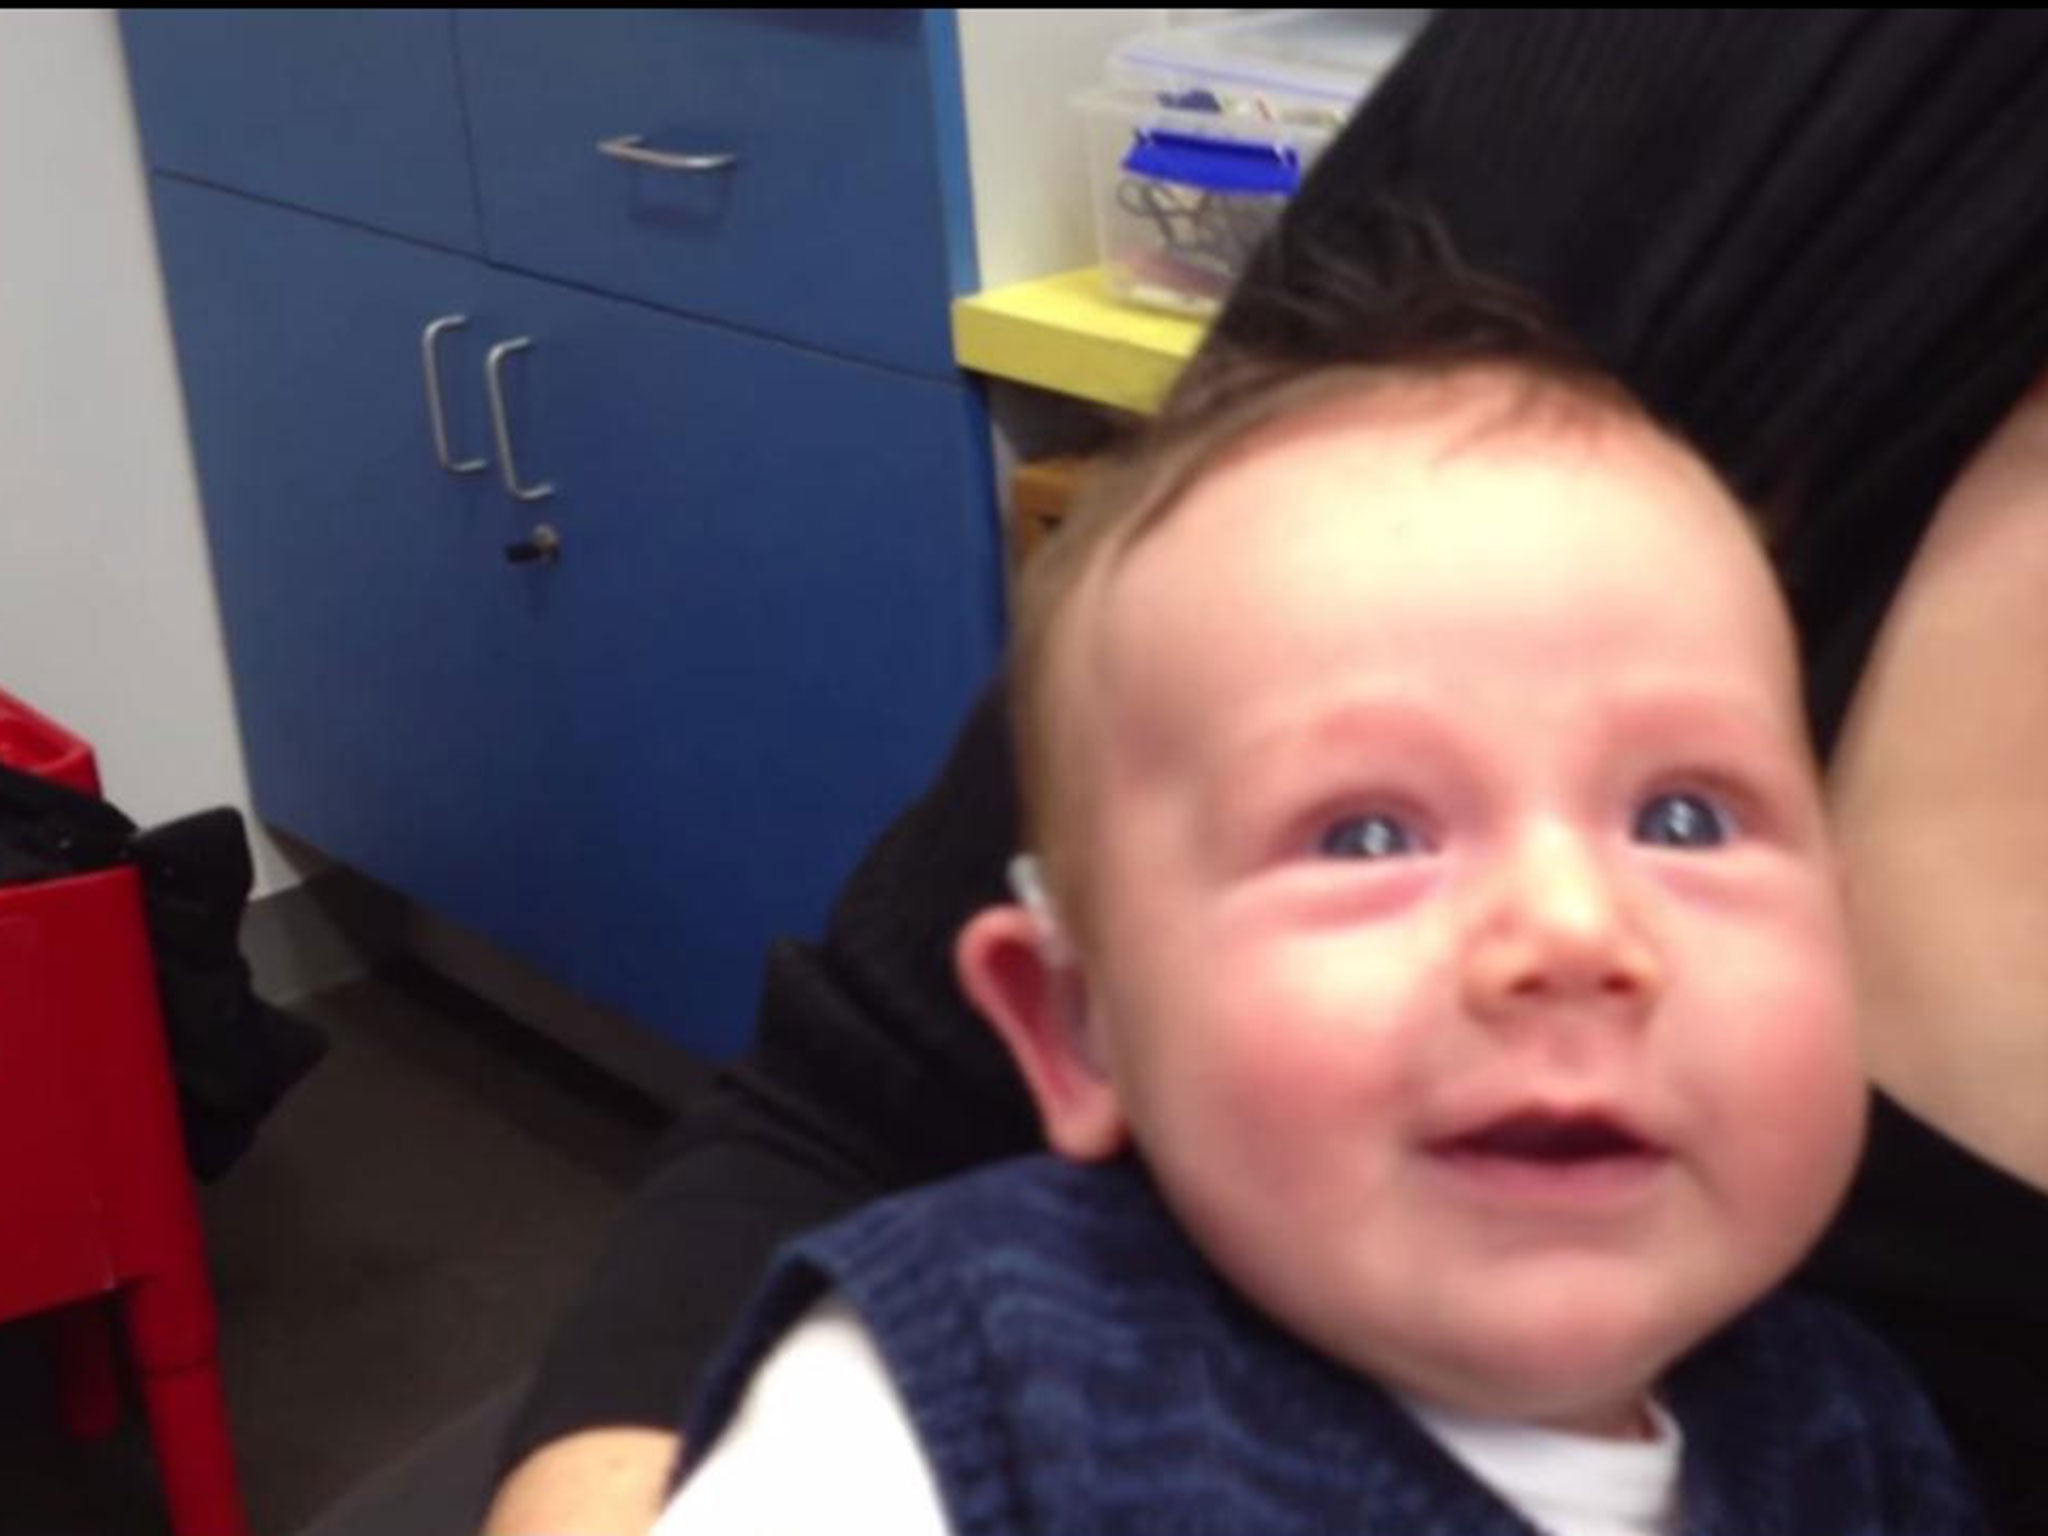 The Australian parents of a baby boy born deaf have shared the touching moment their son heard their voices for the first time on YouTube